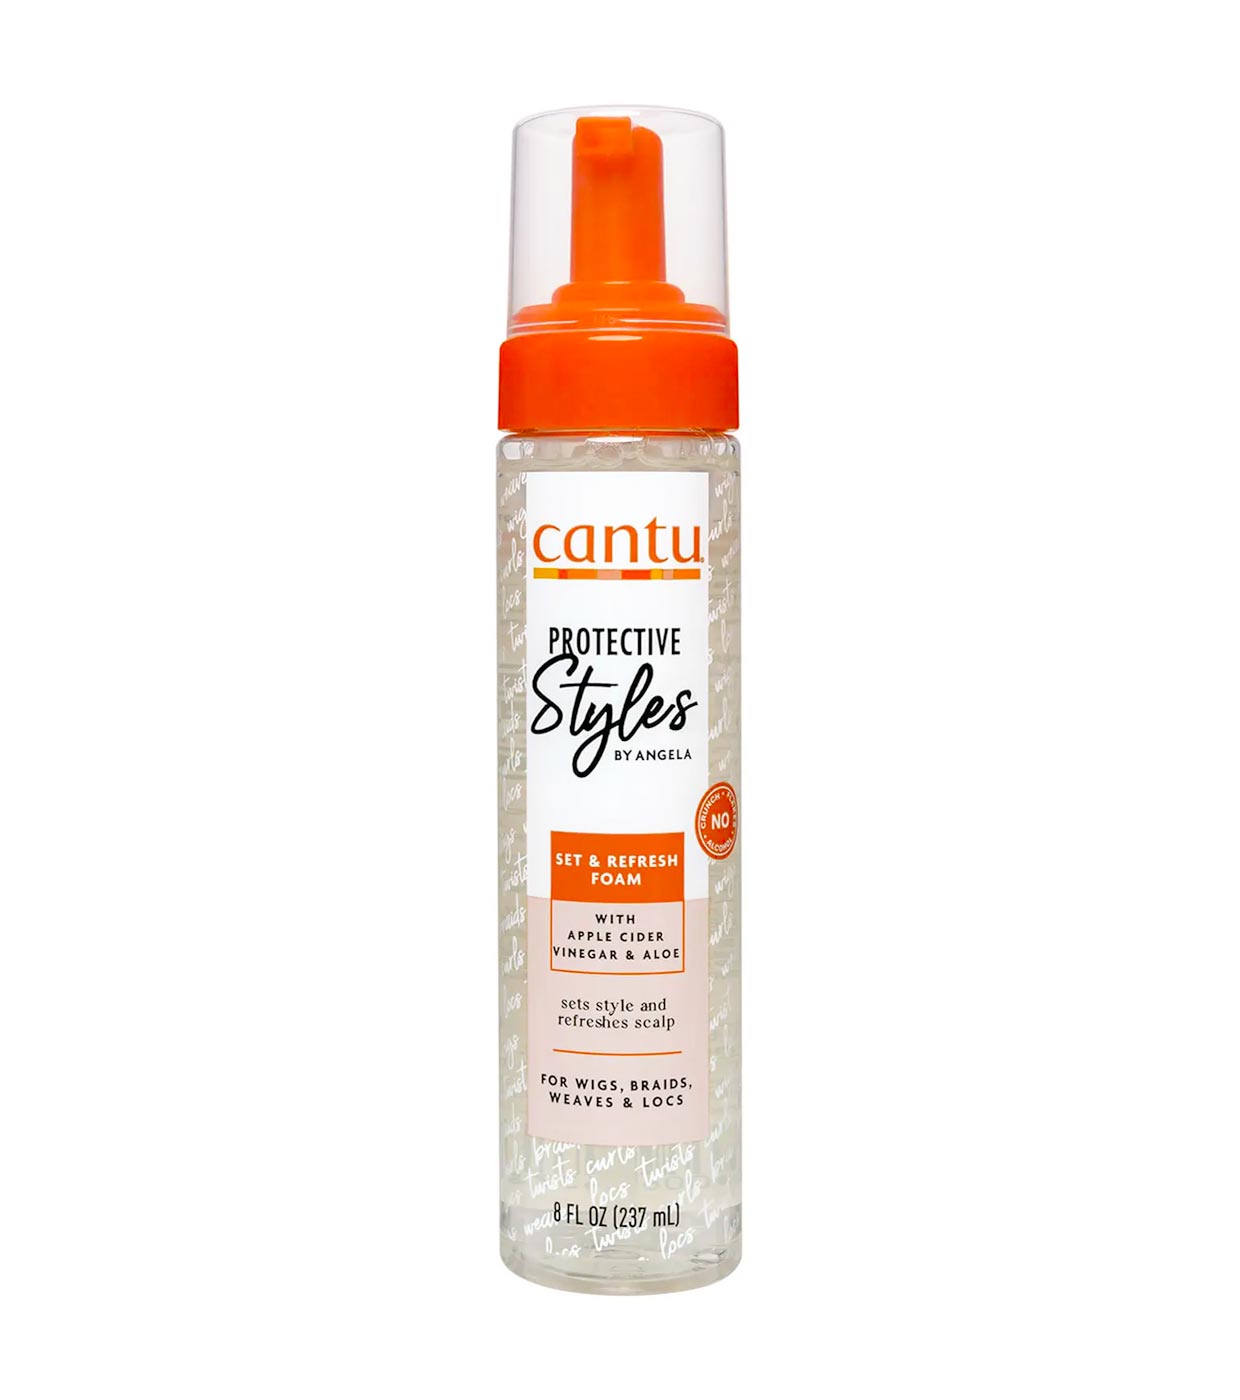 *Protective Maquillalia - | Cantu and Fresh Set foam - Natural - Styles* Buy hair & extensions Fixing